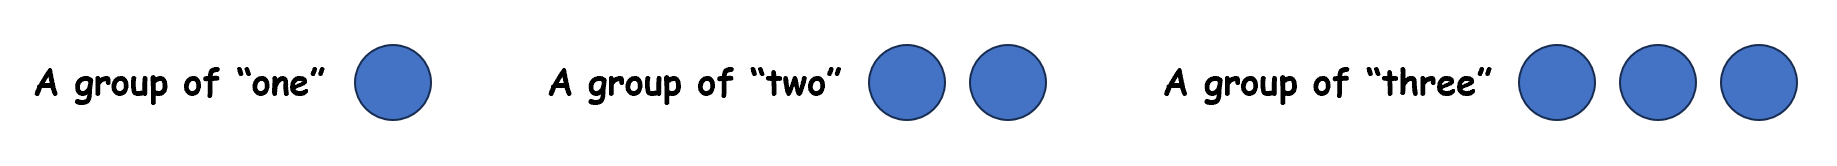 Group-of-1-of-2-of-3.PNG